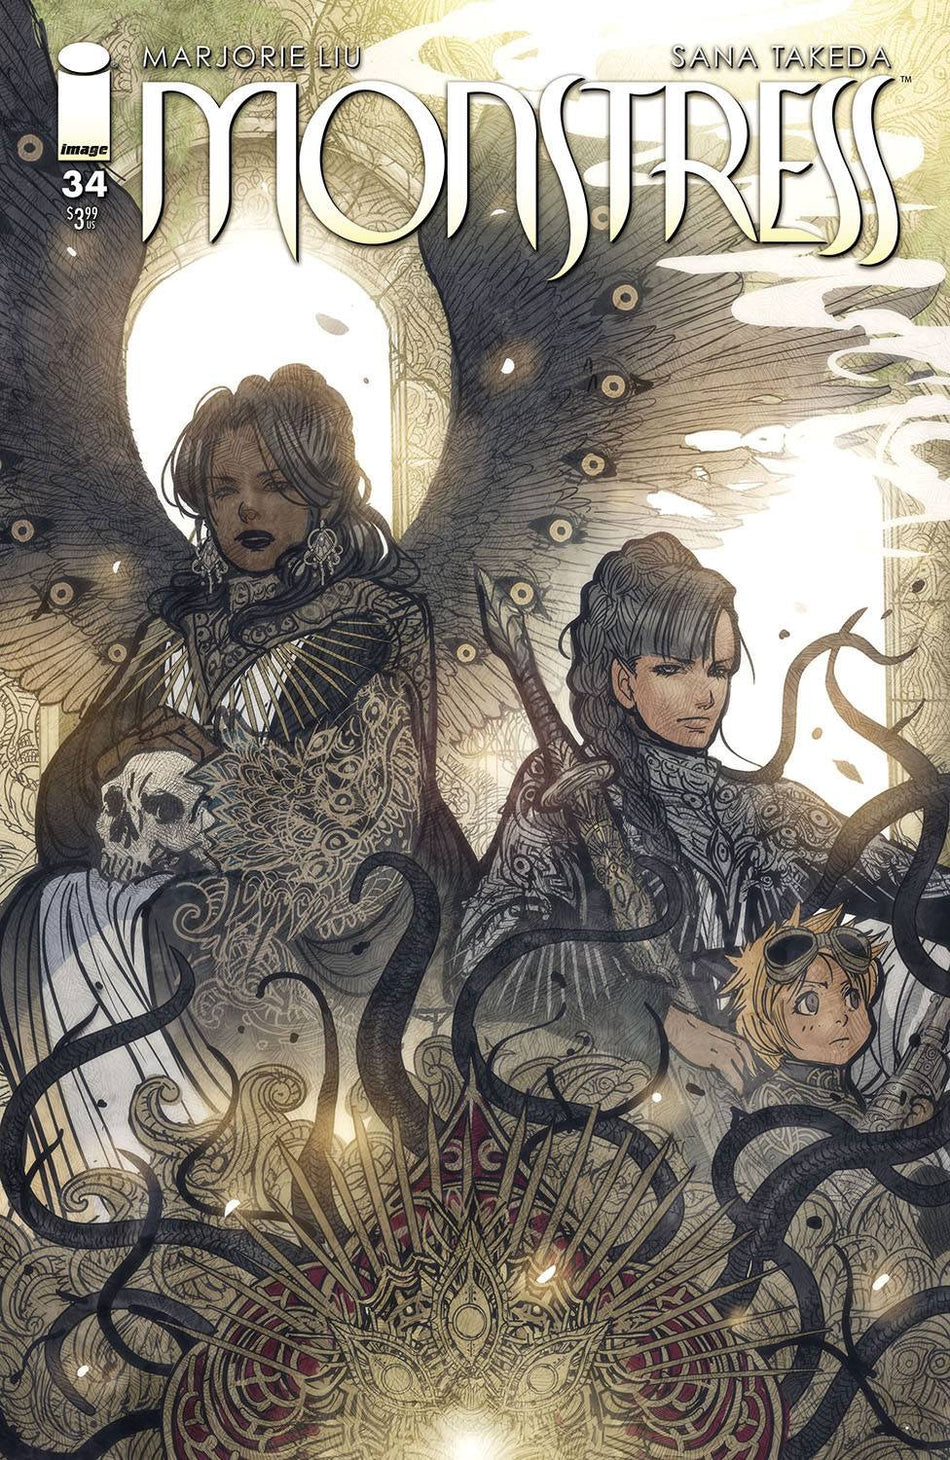 Photo of Monstress Issue 34 (MR) comic sold by Stronghold Collectibles